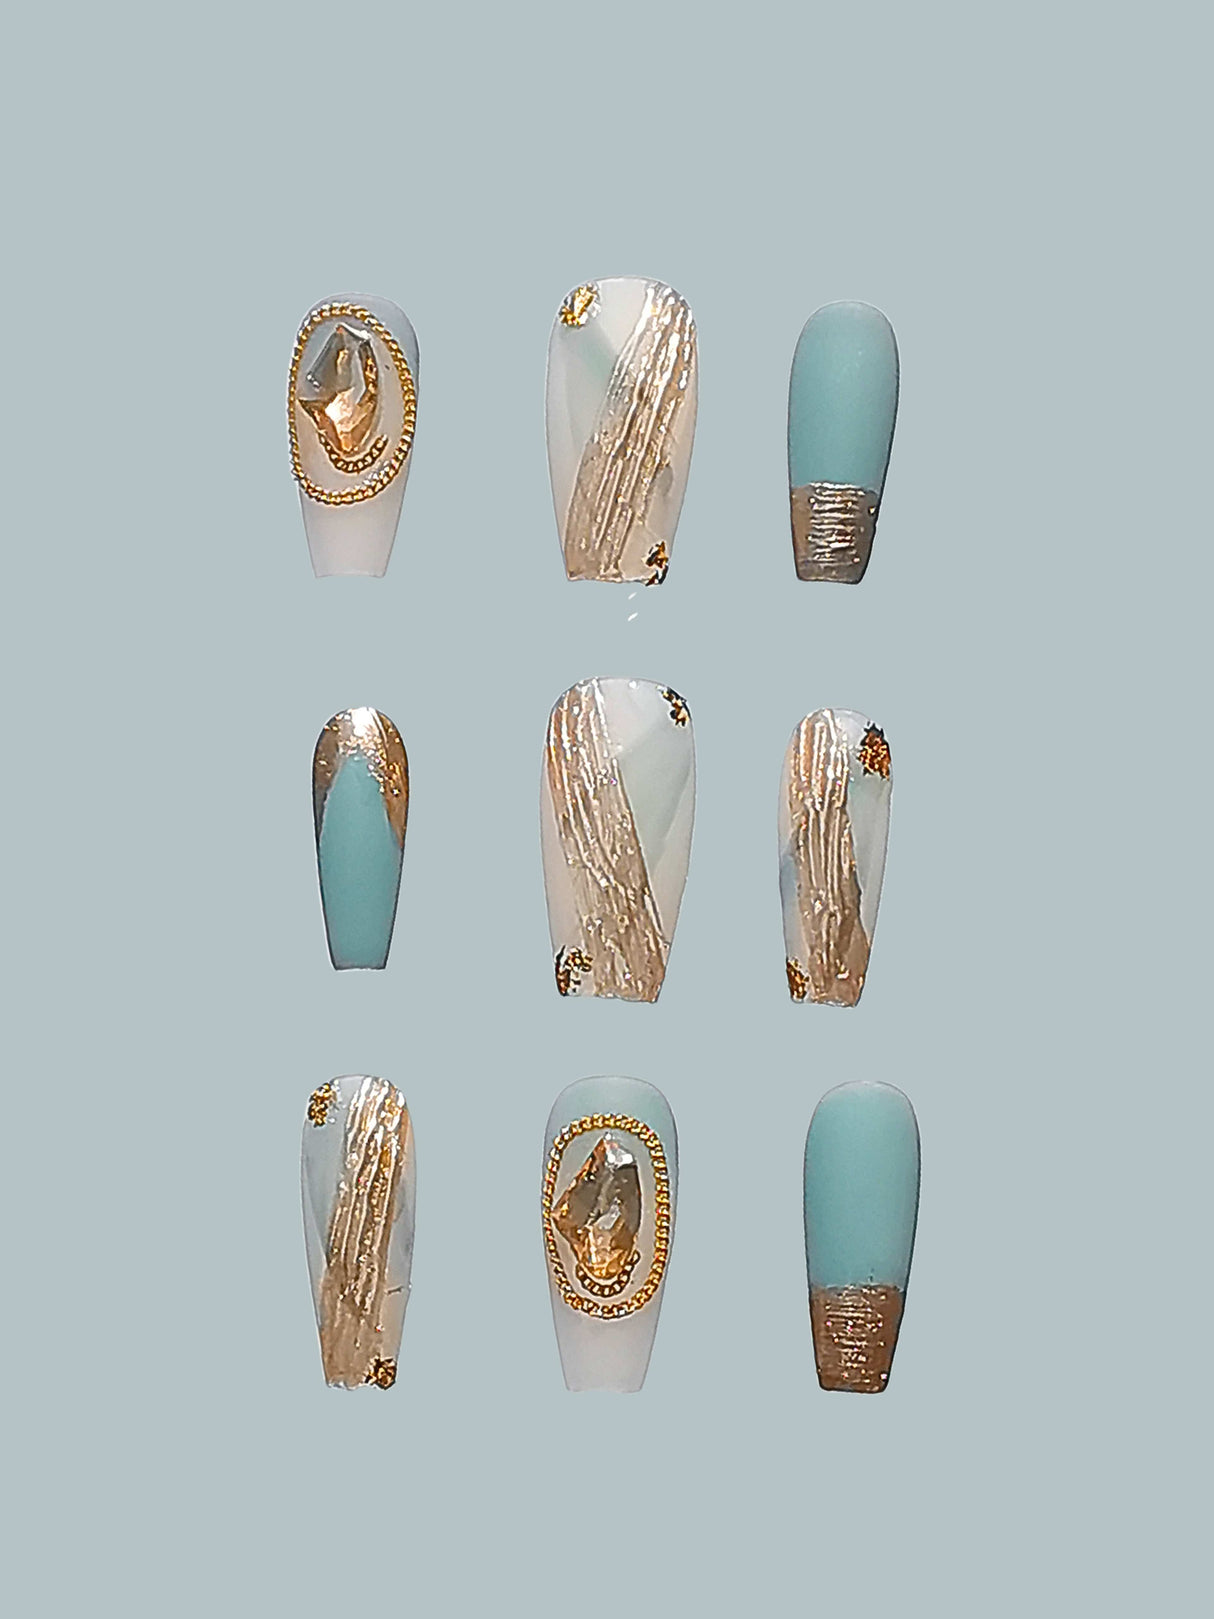 Elegant and trendy nails with pastel blue, white, and gold accents, perfect for special occasions or fashion statements. Bold canvas for nail art.